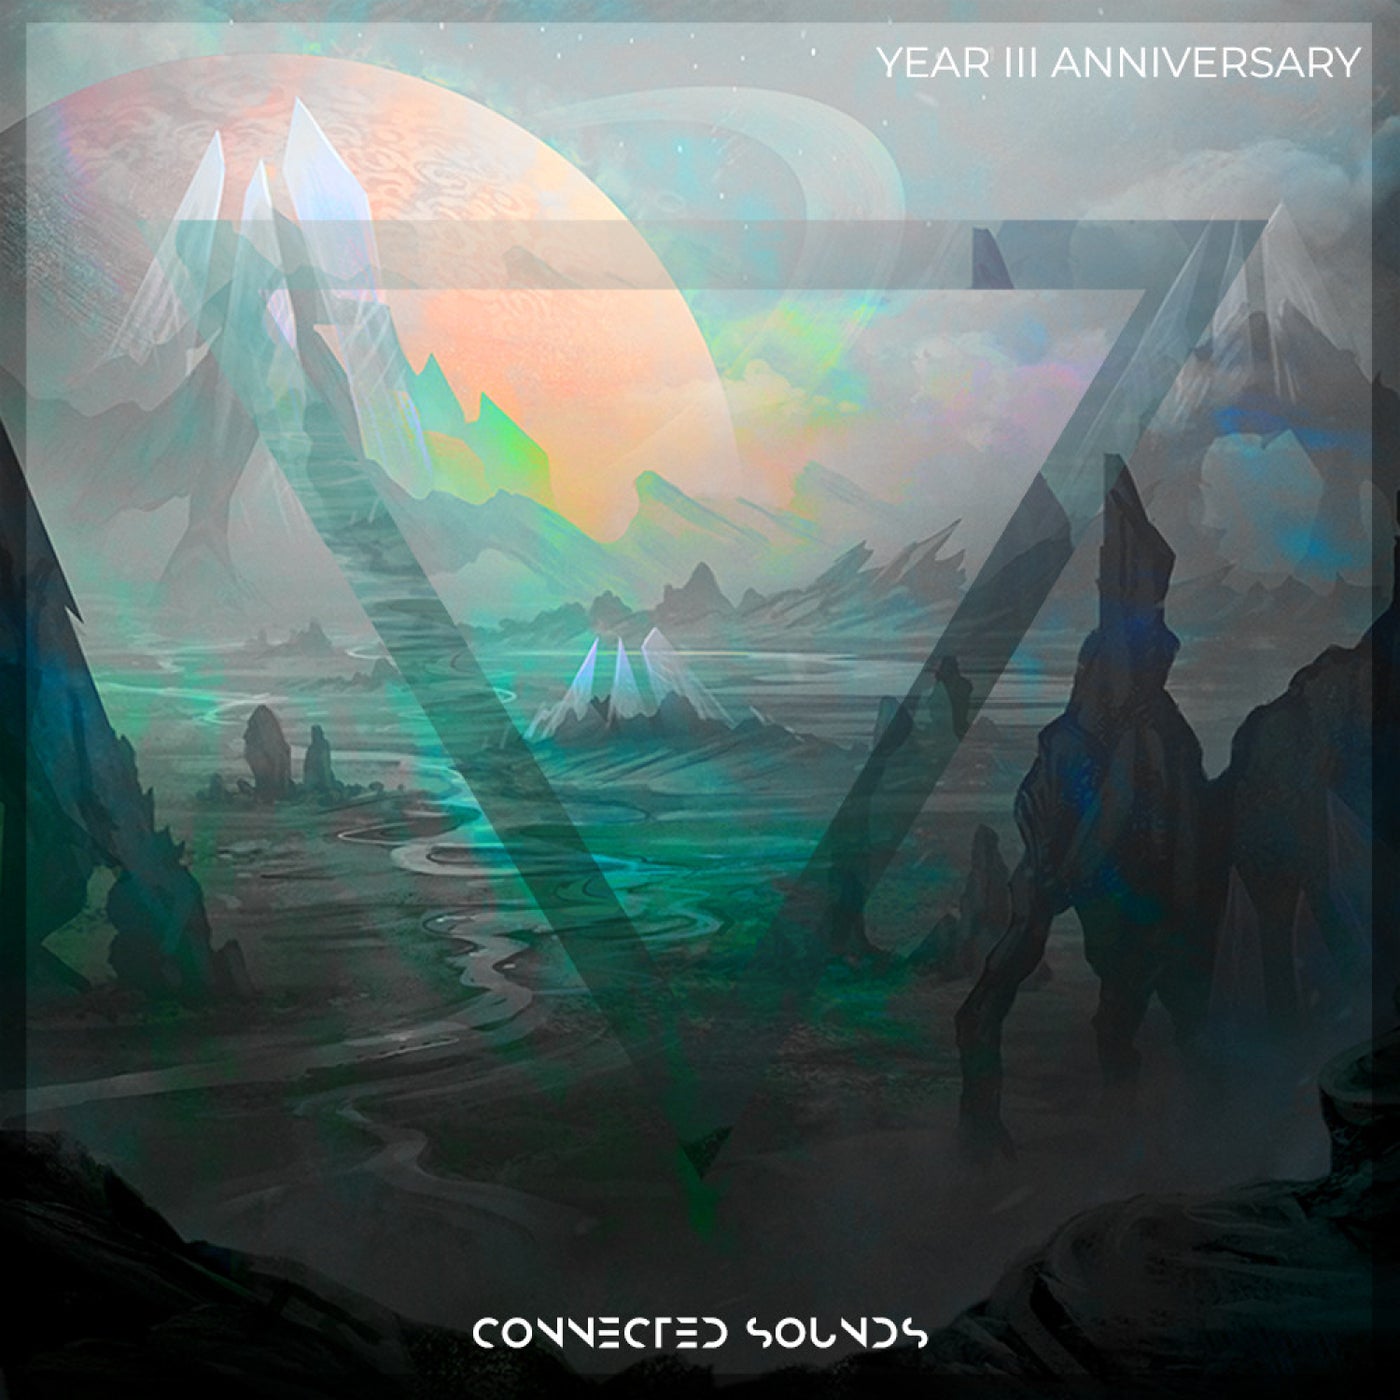 Year 3 Anniversary - fragment. Connected sounds